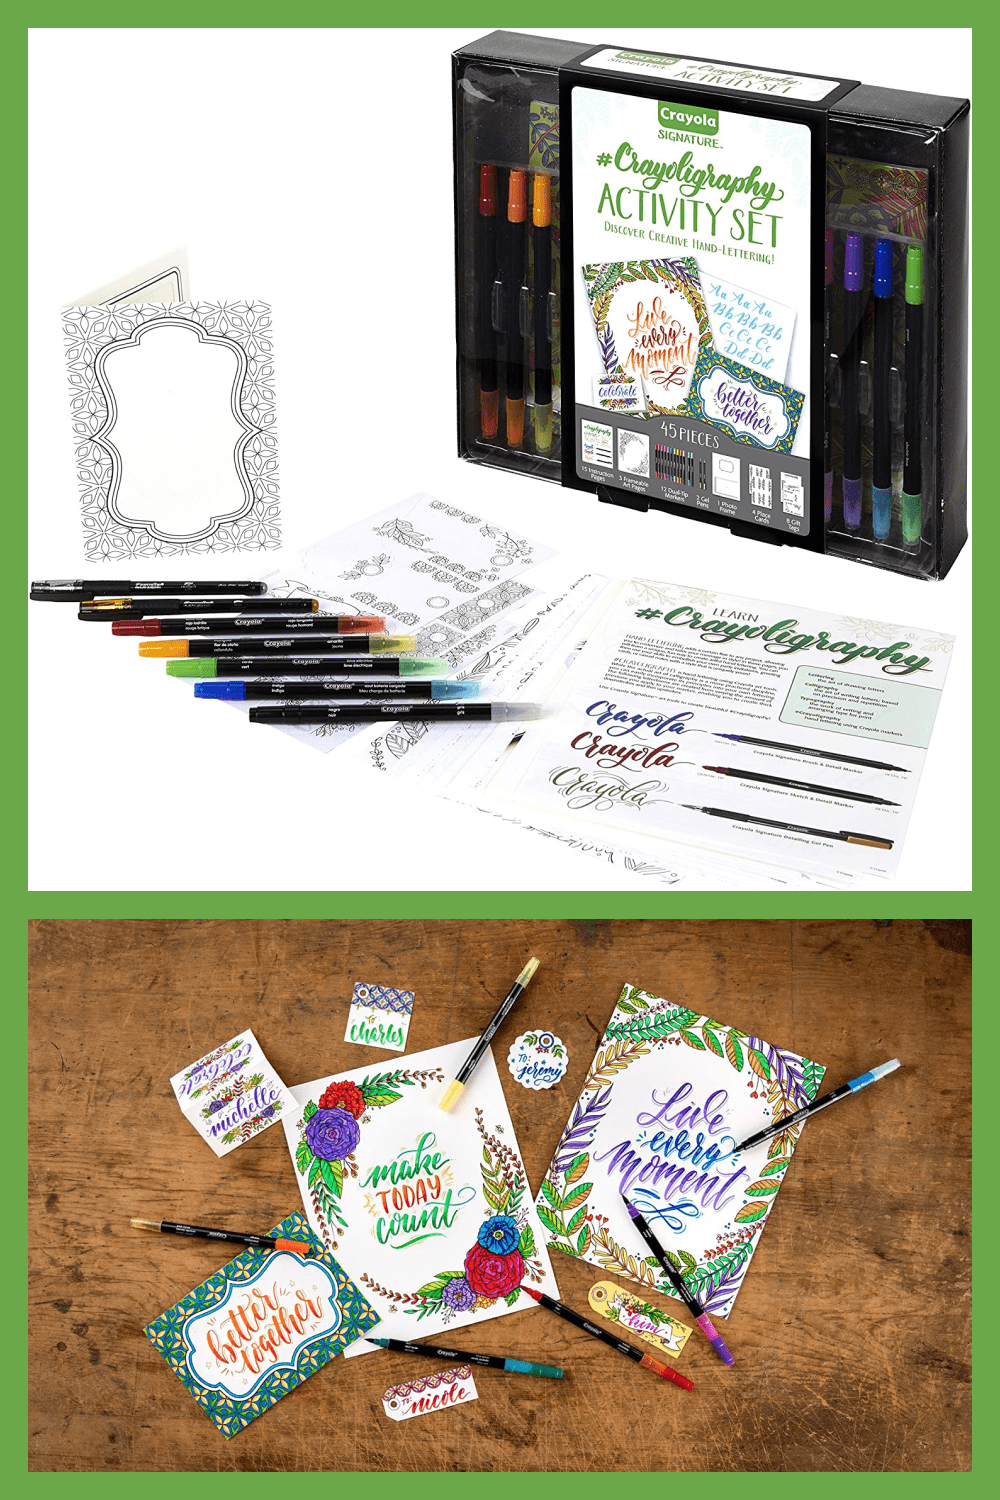 This kit includes everything you need to learn the art of hand-lettering, including intro and practice sheets, premium markers, and detailing gel pens.